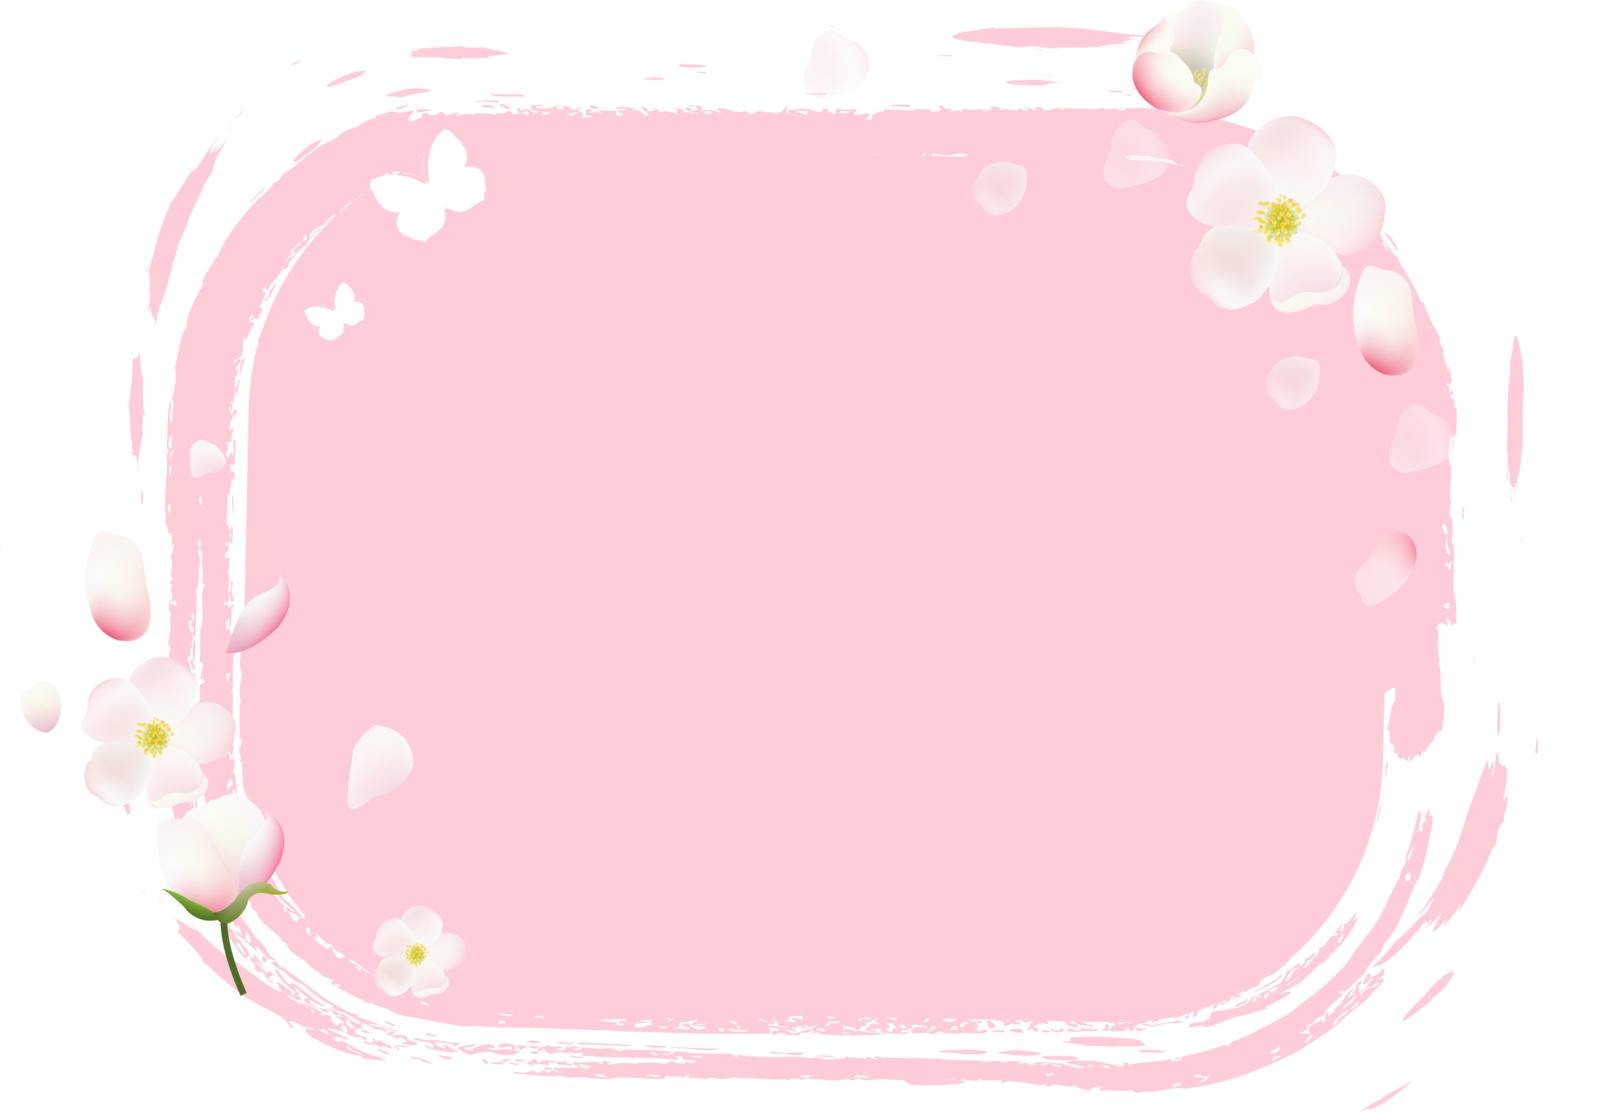 Pink Stain With Flowers by cammep